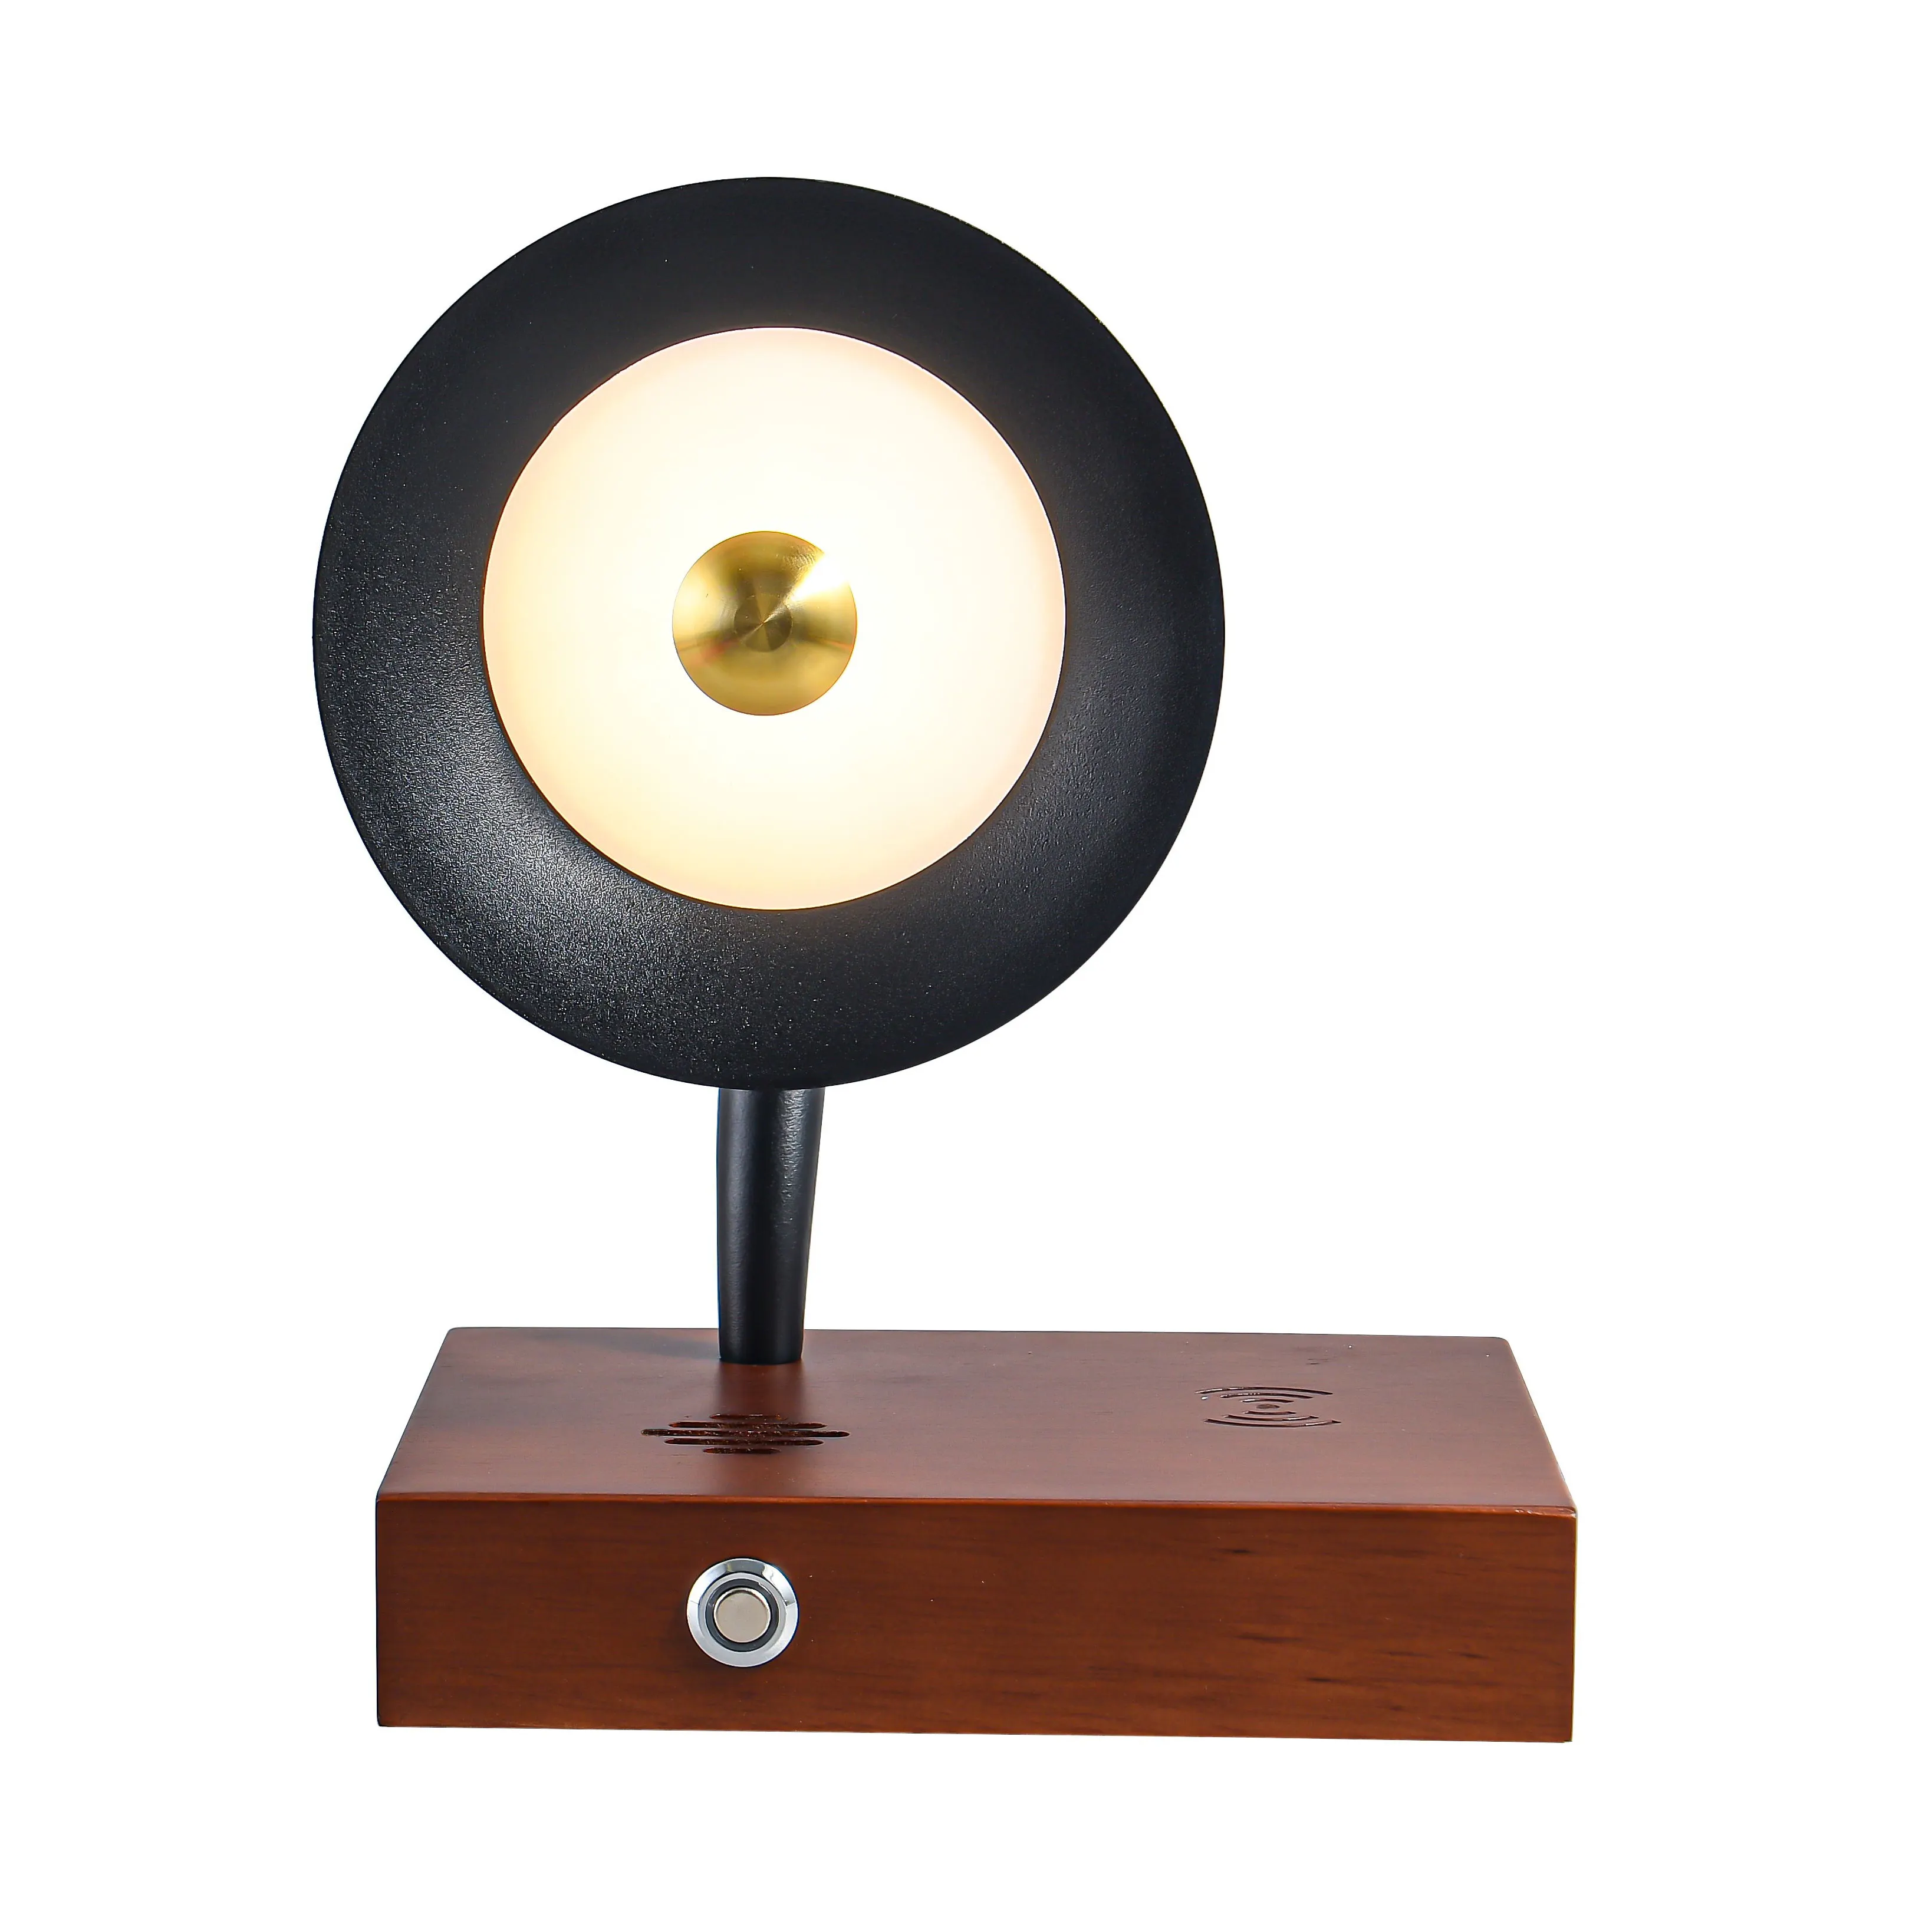 Trending product 2023 new arrival Retro Phonograph Design LED Table Lamp with wireless charger for phone and Bluetooth speaker